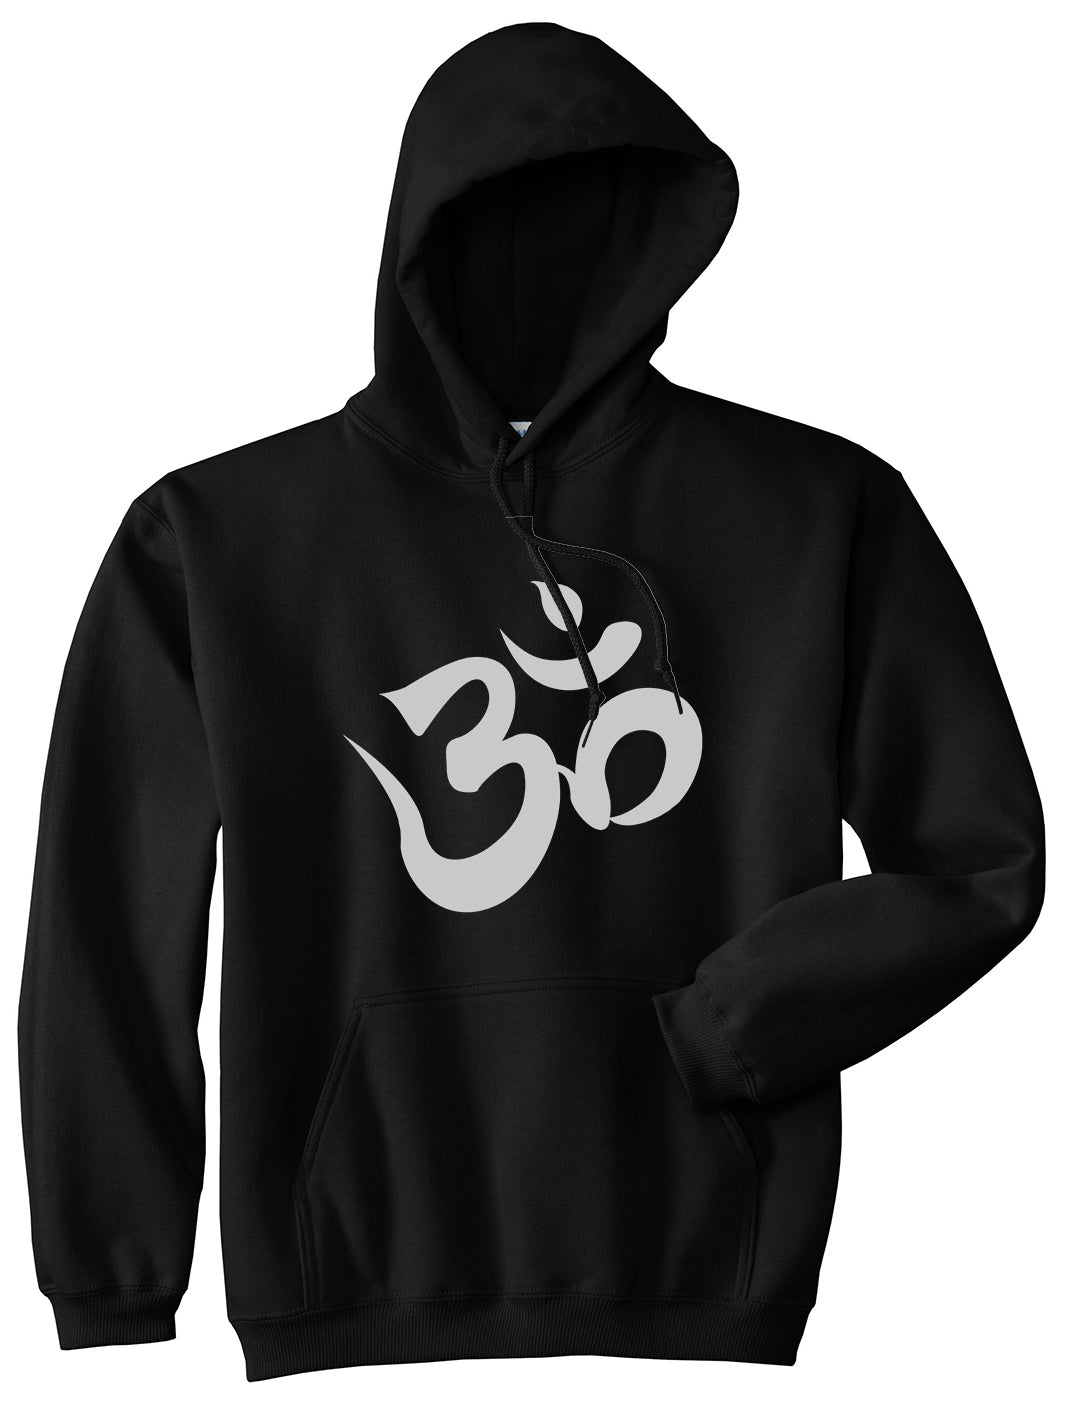 Om Ohm Symbol Black Pullover Hoodie by Kings Of NY